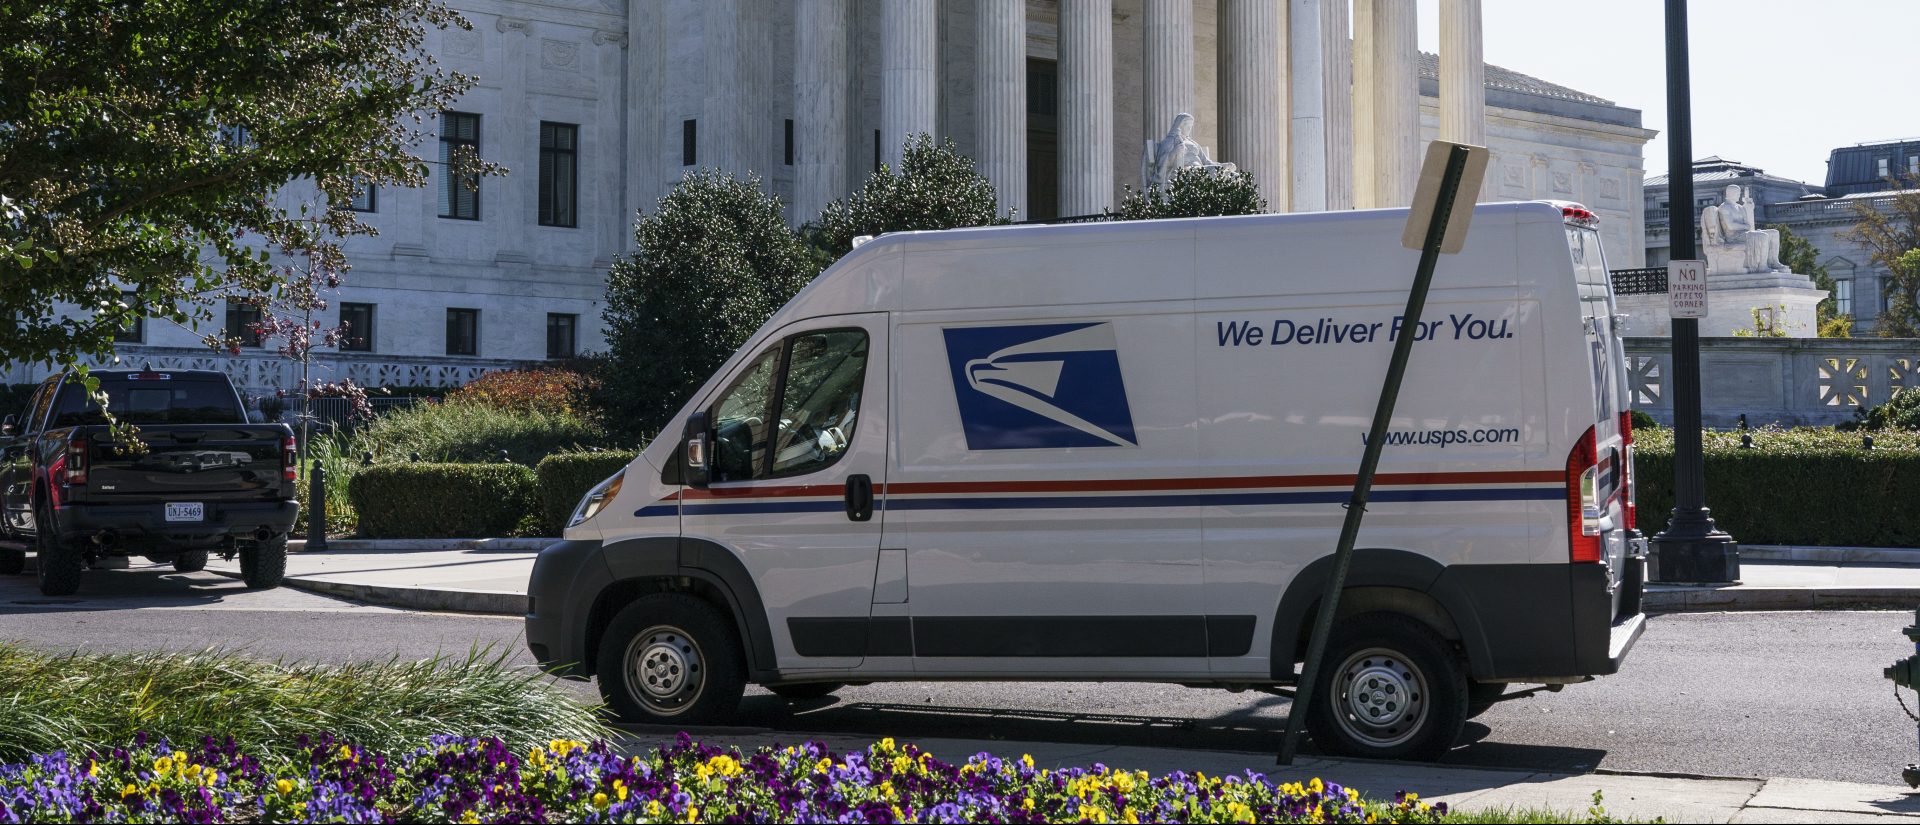 A U.S. Postal Service truck makes deliveries next to the Supreme Court on Election Day, Tuesday, Nov. 3, 2020, in Washington. President Donald Trump says he's planning an aggressive legal strategy to try prevent Pennsylvania from counting mailed ballots that are received in the three days after the election, a matter that could find its way to the high court.